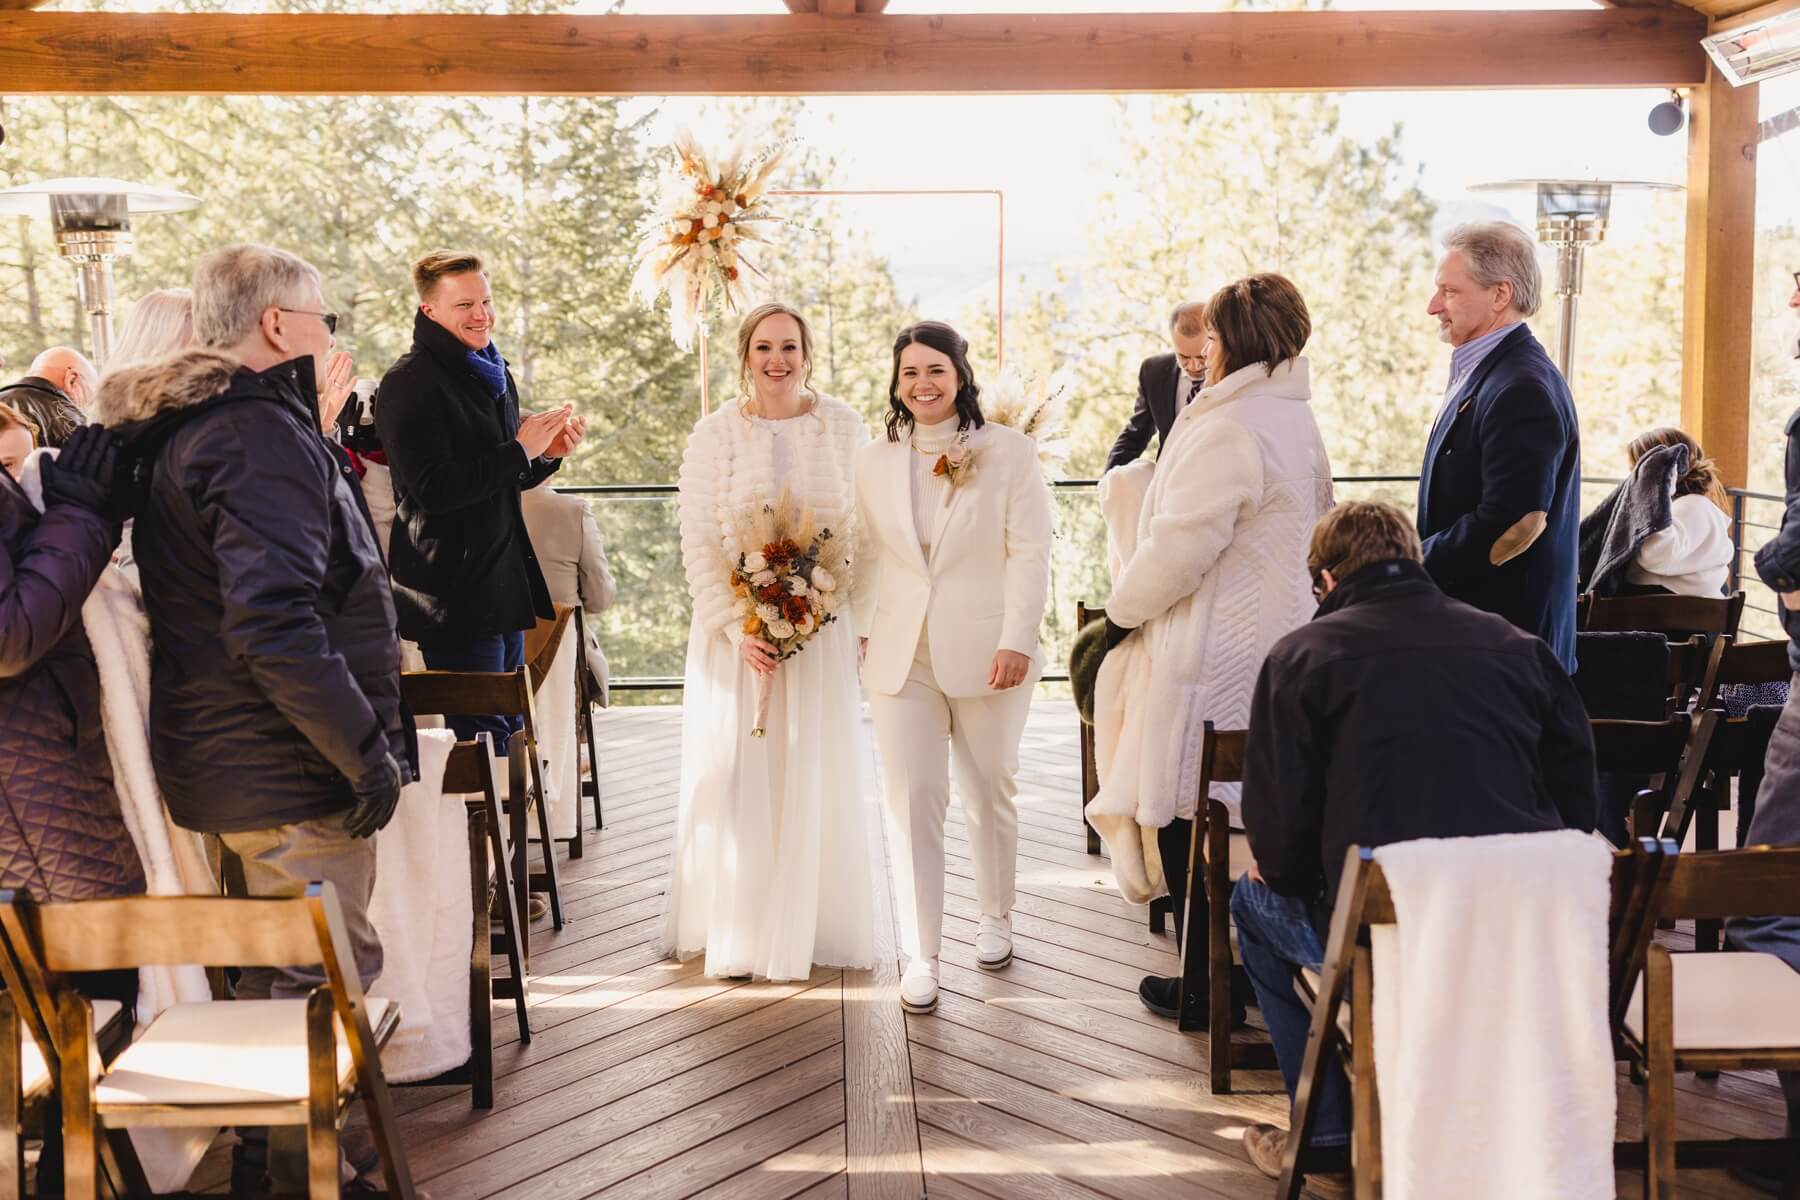 Couple walking down the aisle in white wedding dress and white suit